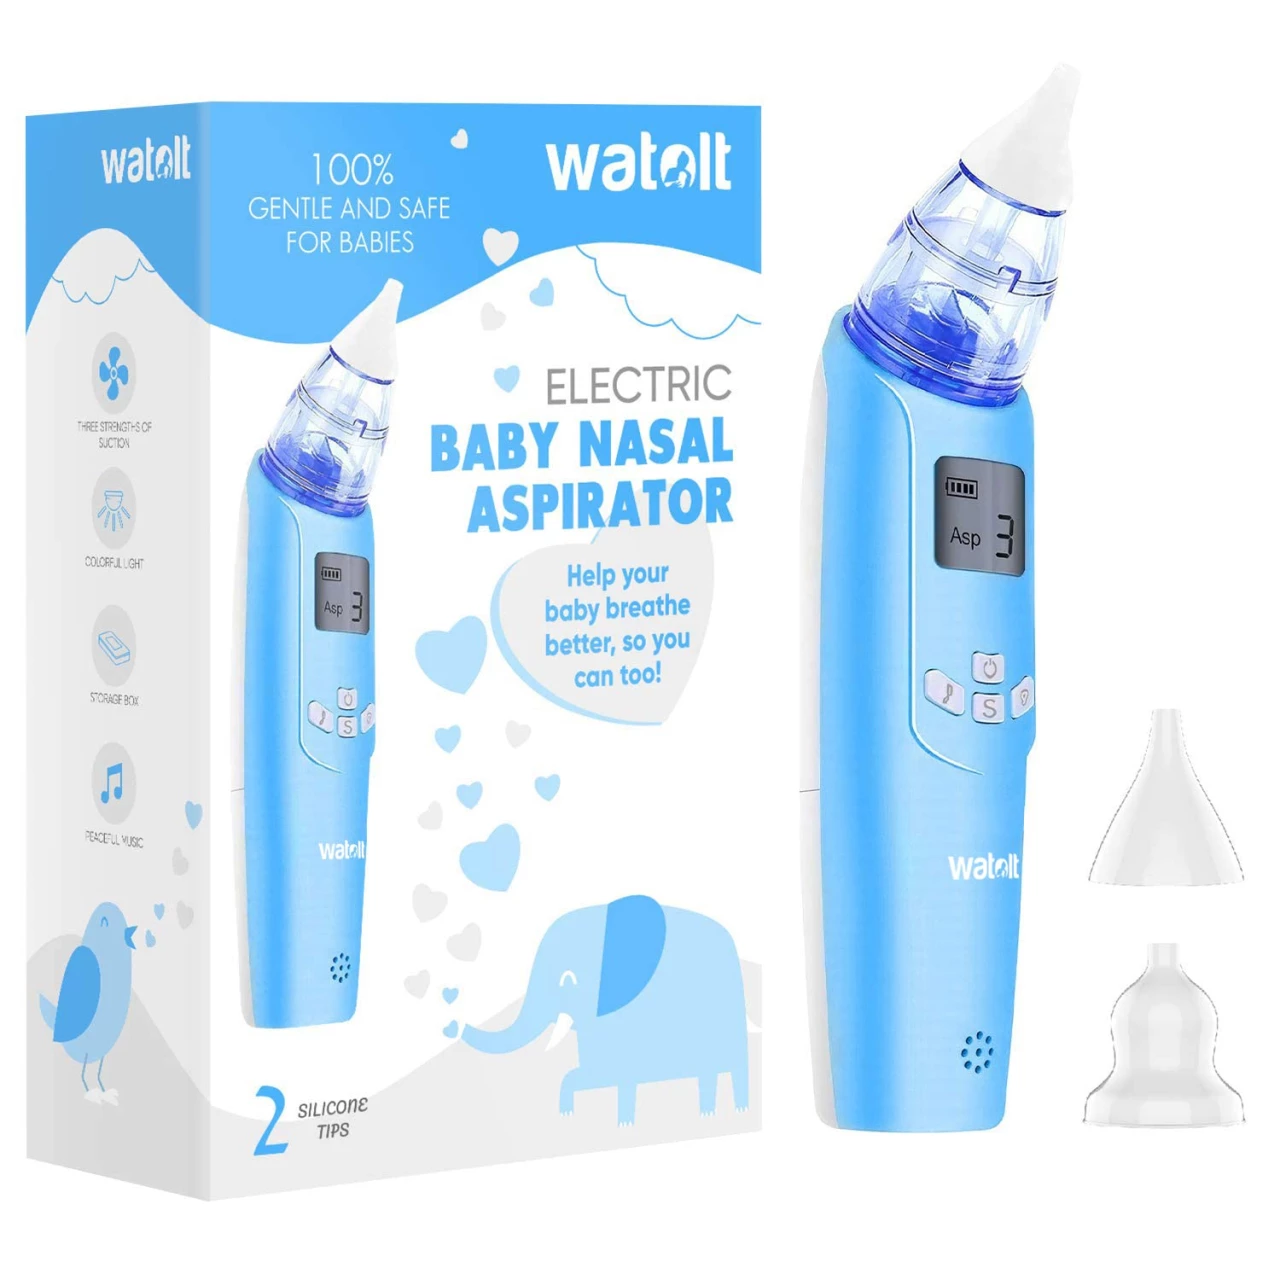 Watolt Baby Nasal Aspirator - Electric Nose Suction for Baby - Automatic Booger Sucker for Infants